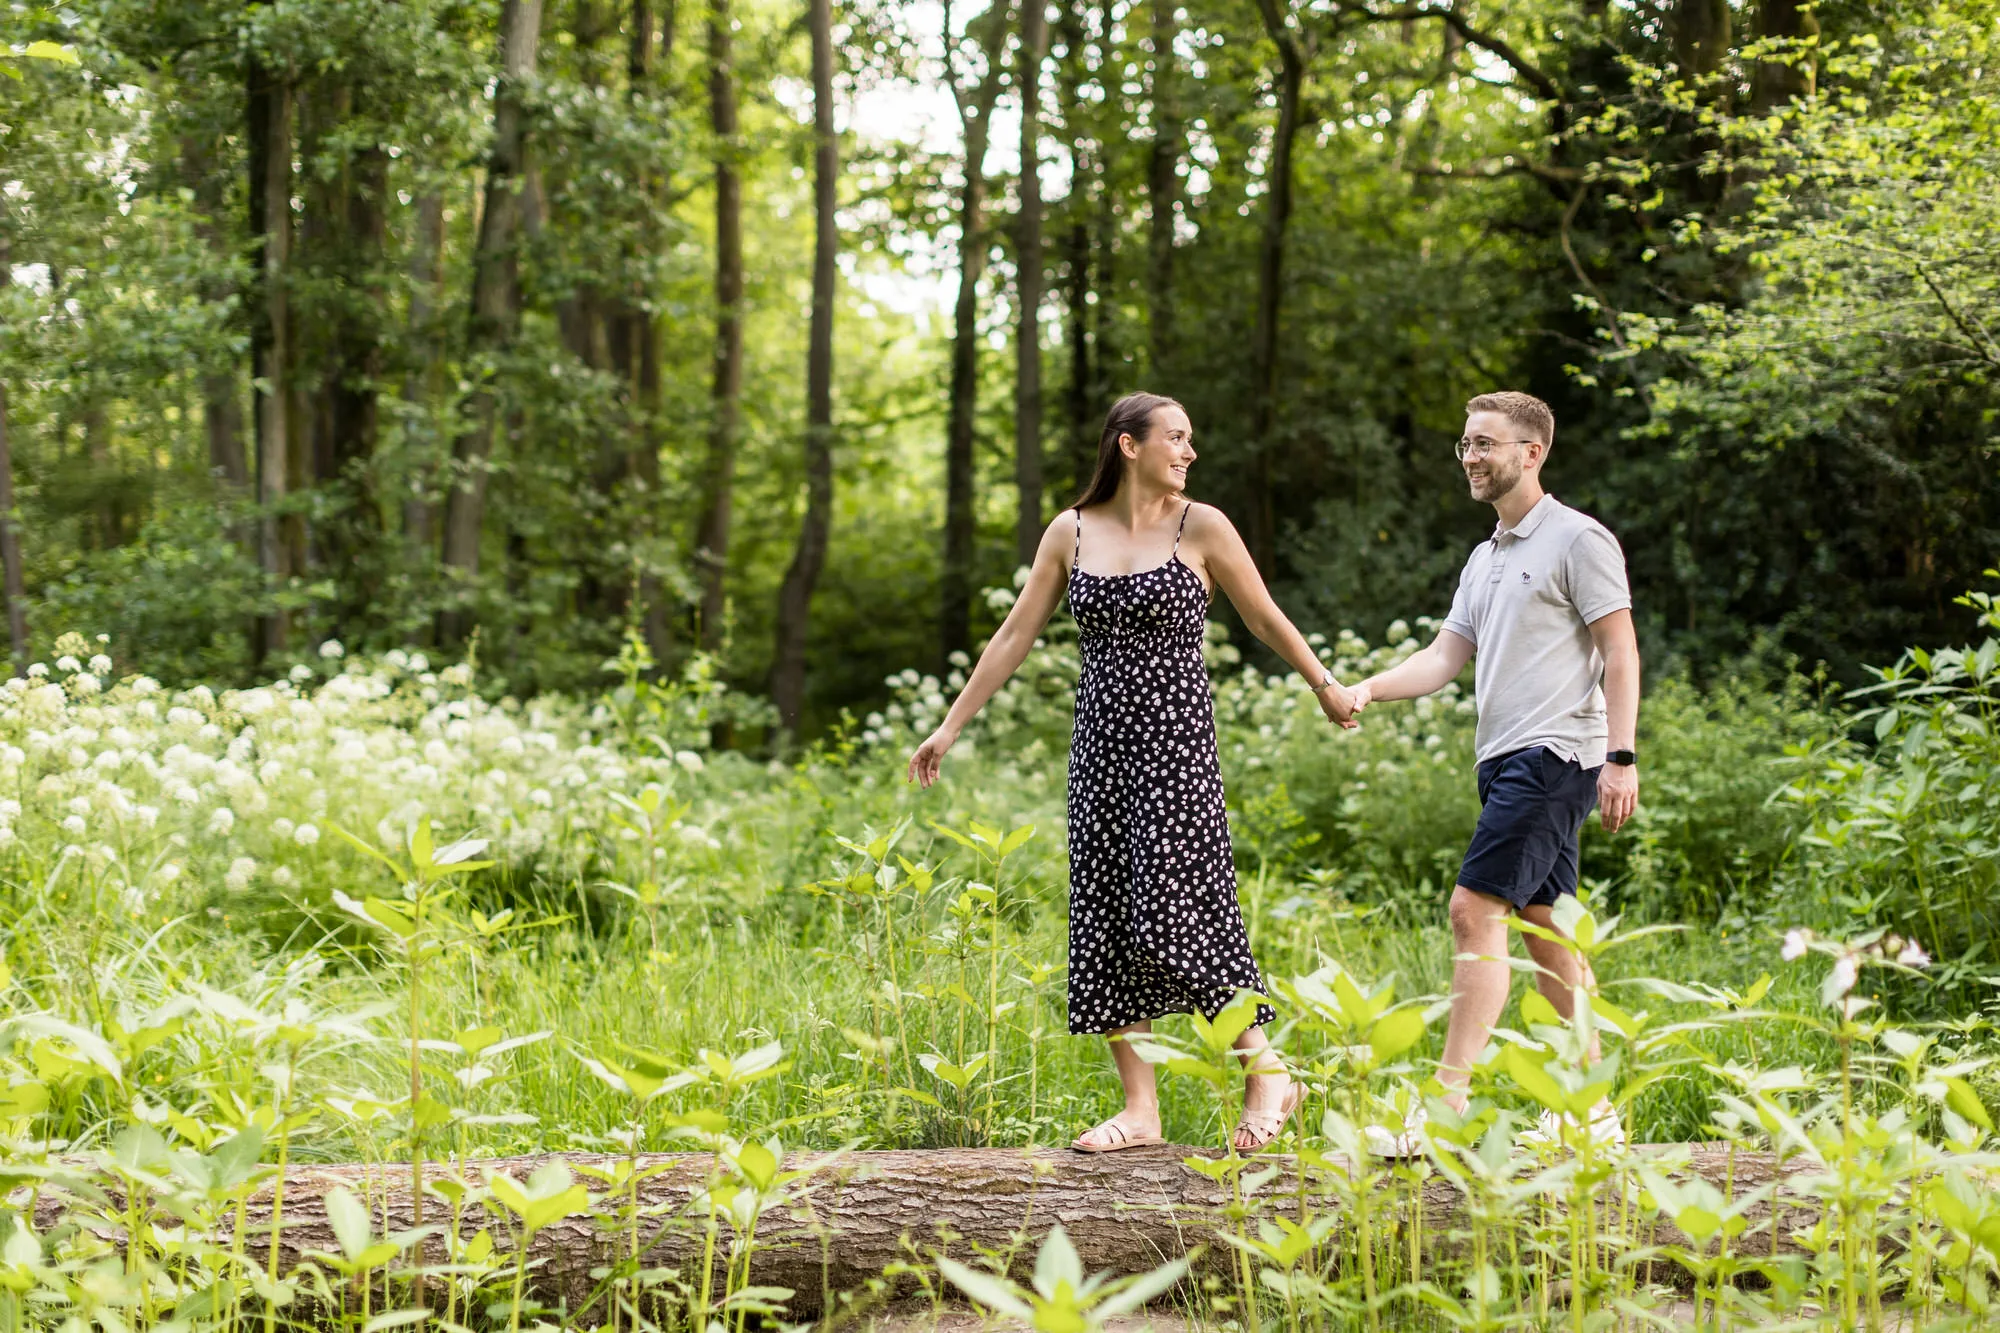 Reportage Wedding Photographer - a couple walk together through woodland on their engagement photo shoot 